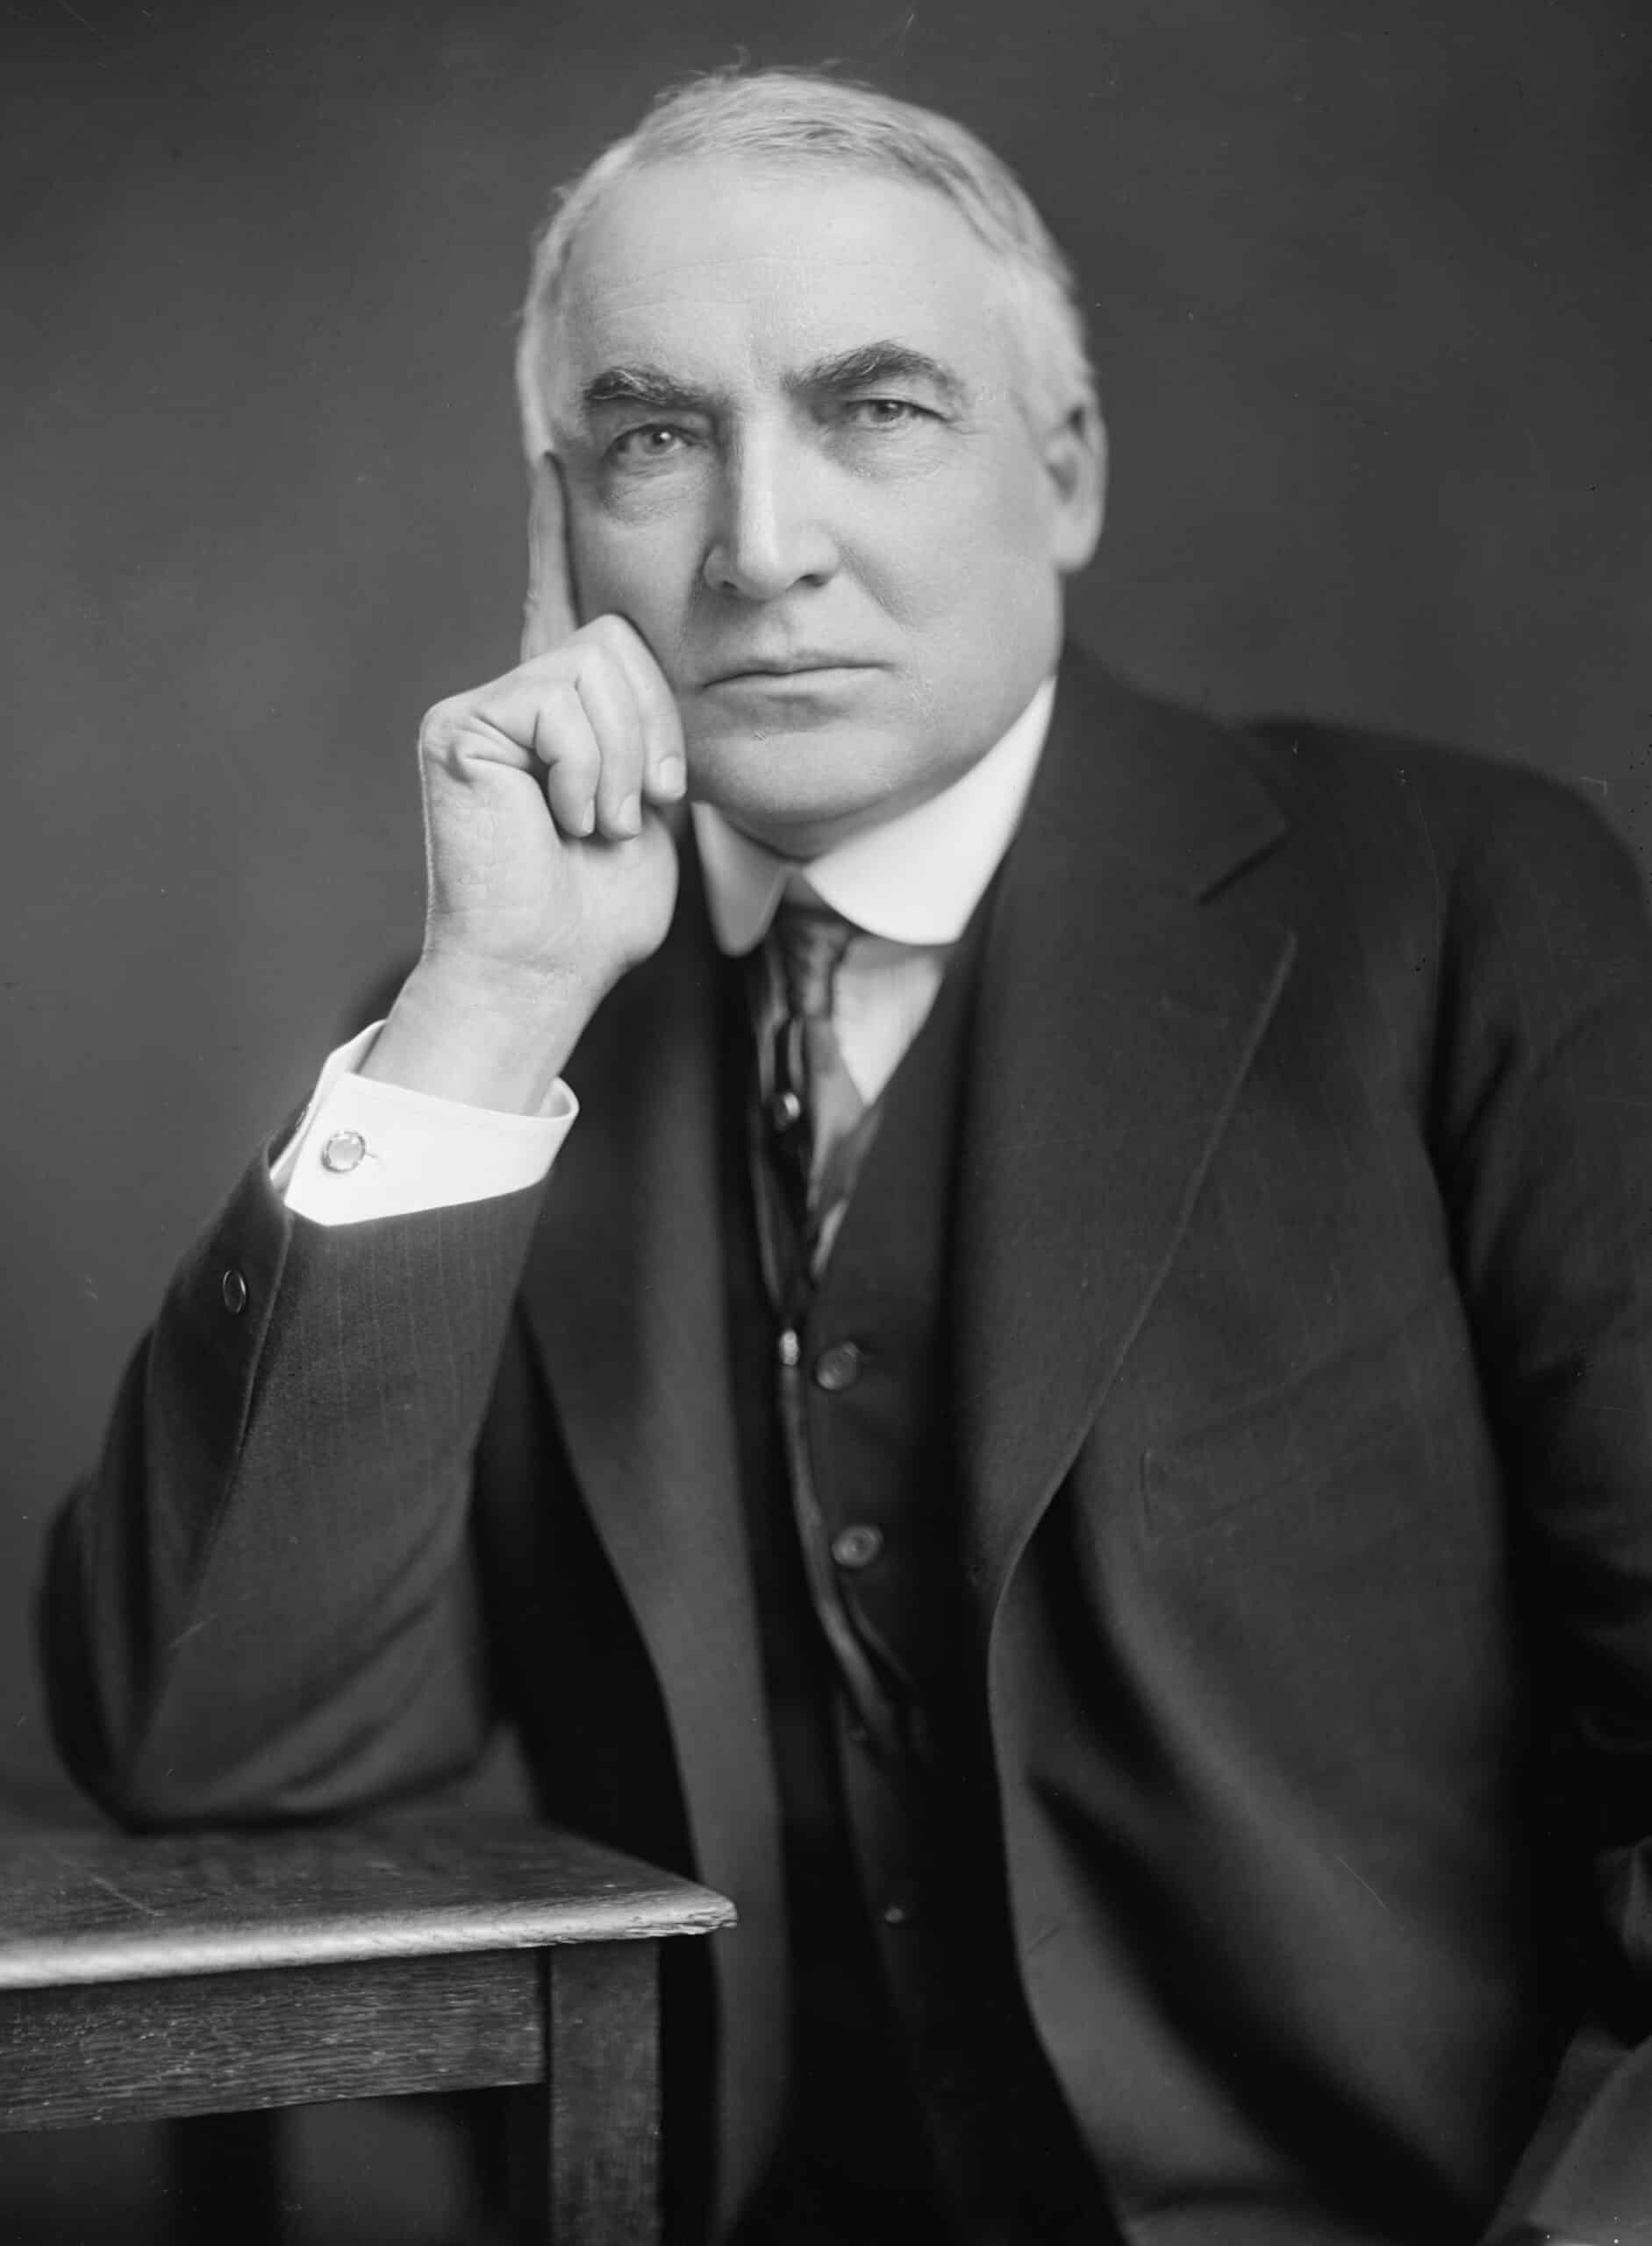 President William Harding the 29th President of the United States